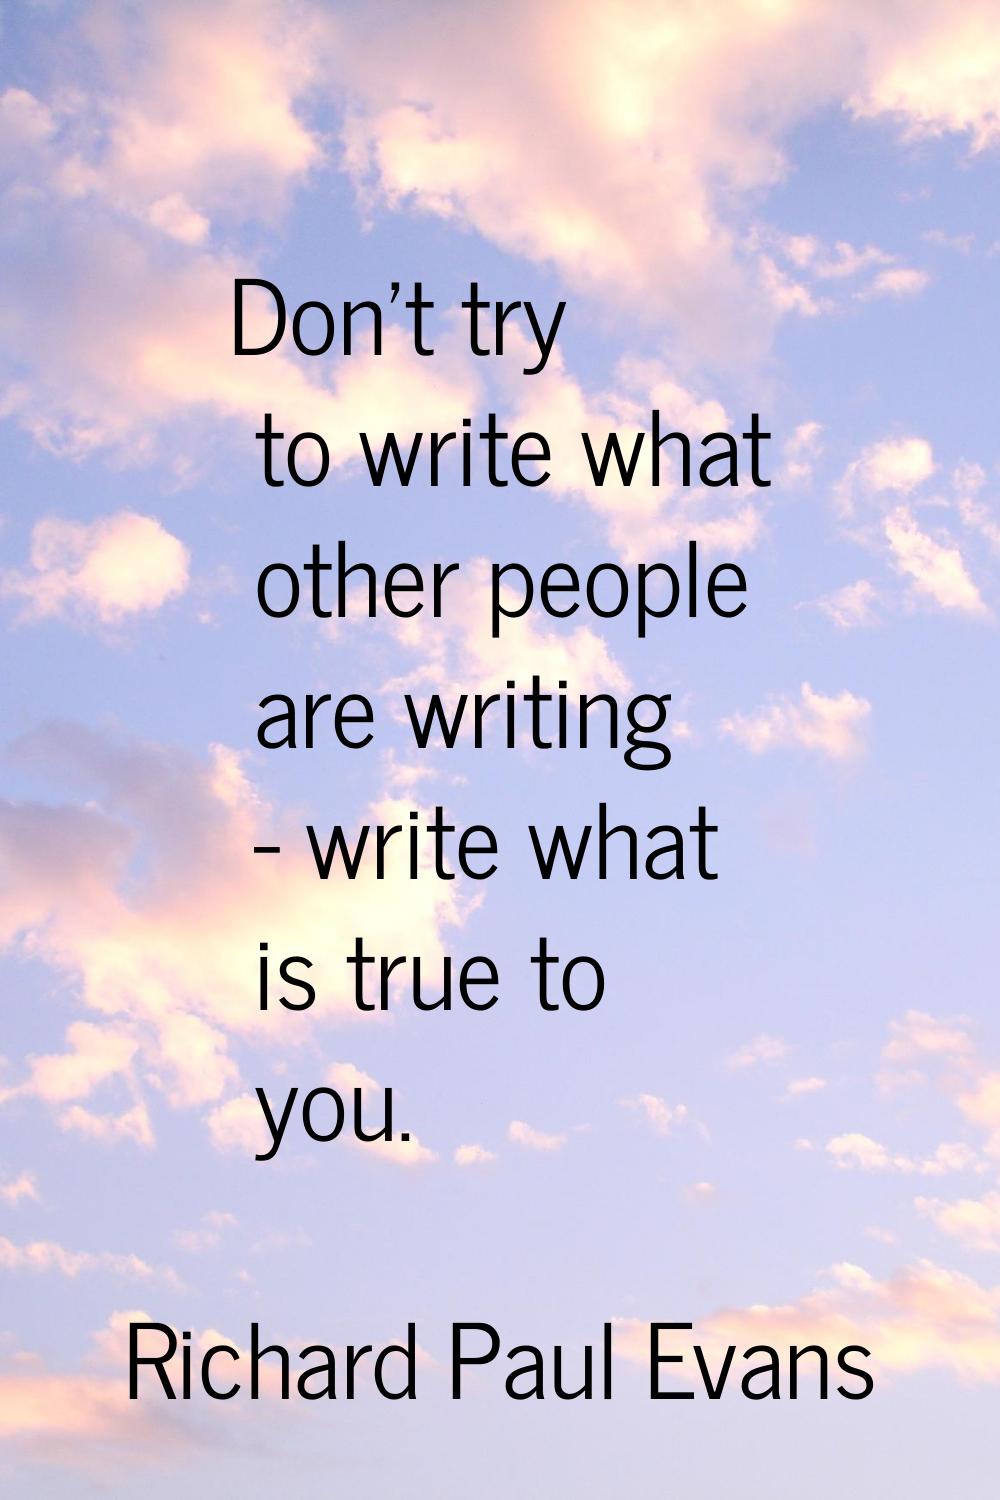 Don't try to write what other people are writing - write what is true to you.